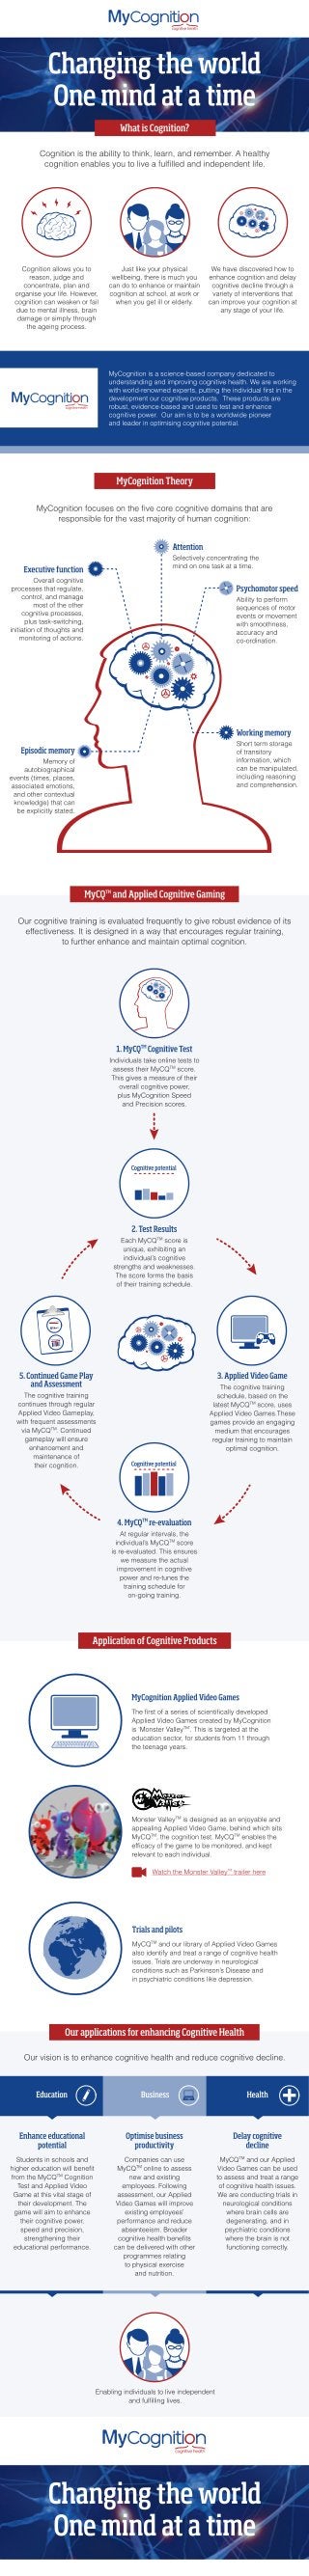 MyCognition what we do infographic